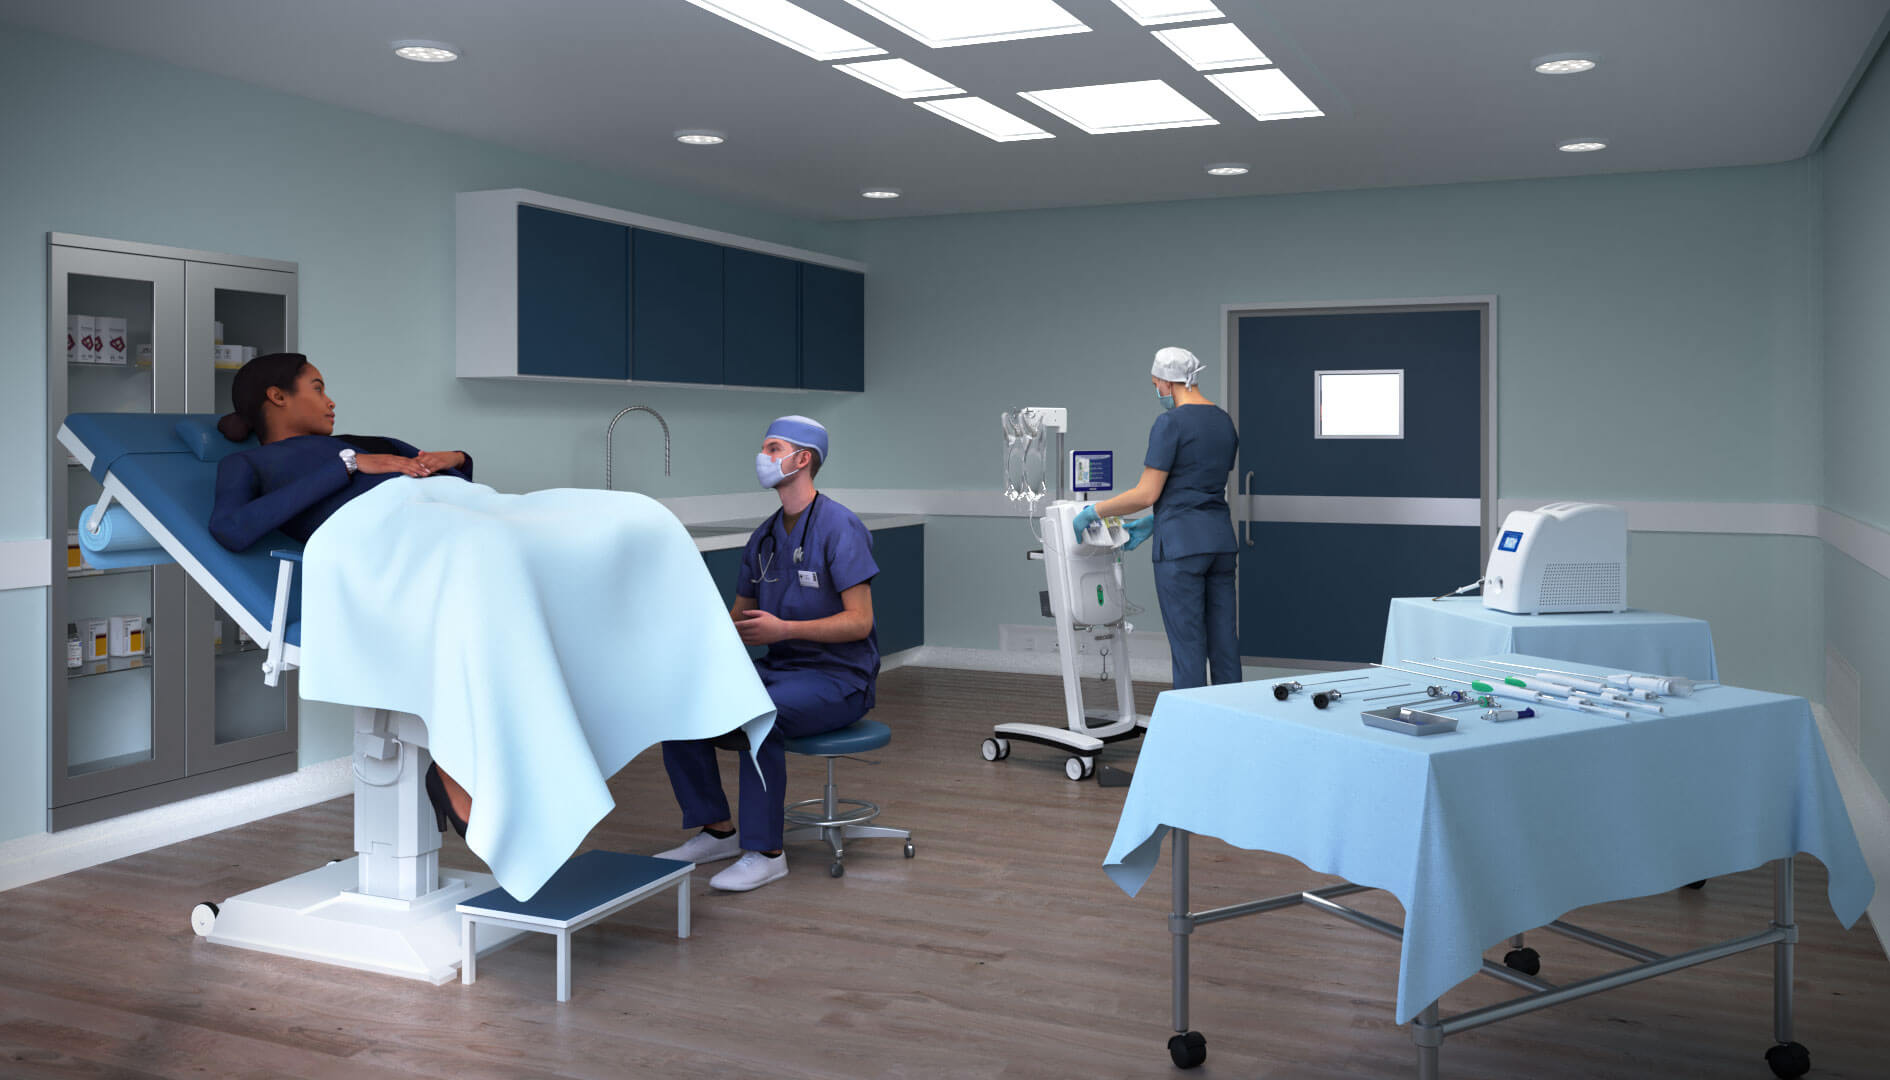 3D visual showing hospital room, with two nurses and a patient